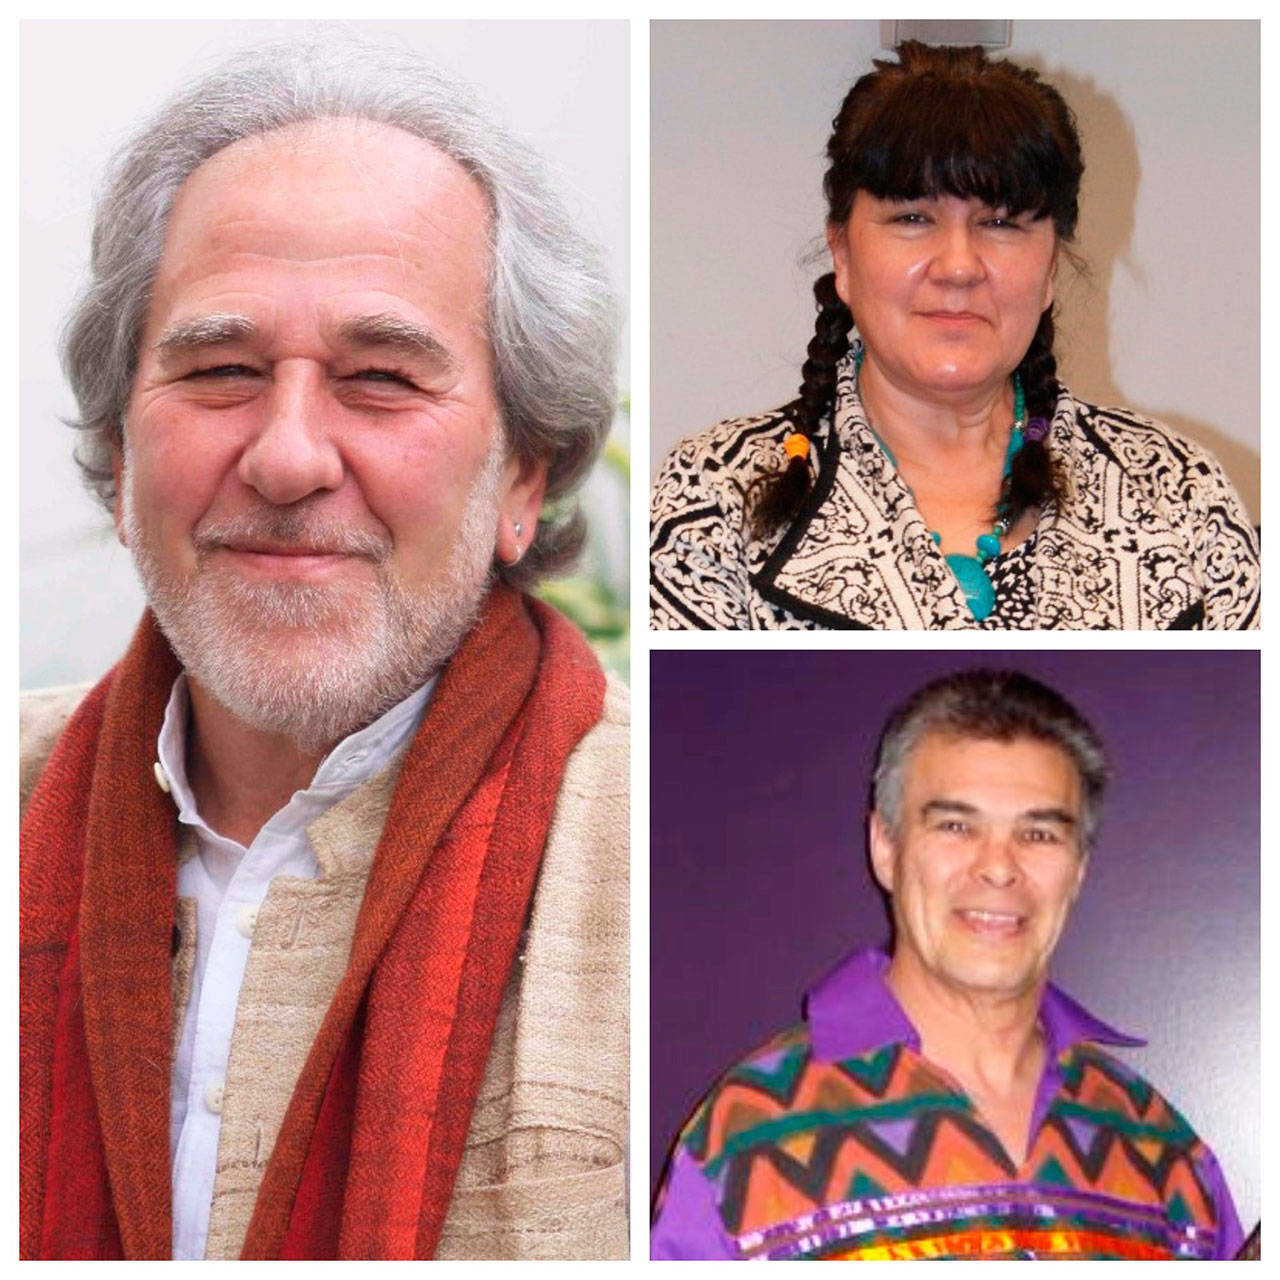 Biologist Bruce Lipton (left), Rosie Trakostanec “White Elk Medicine Woman” (top right) and Tom McCallum “White Standing Buffalo” (bottom right) will speak about science and spirituality next Saturday. (Courtesy Photos)